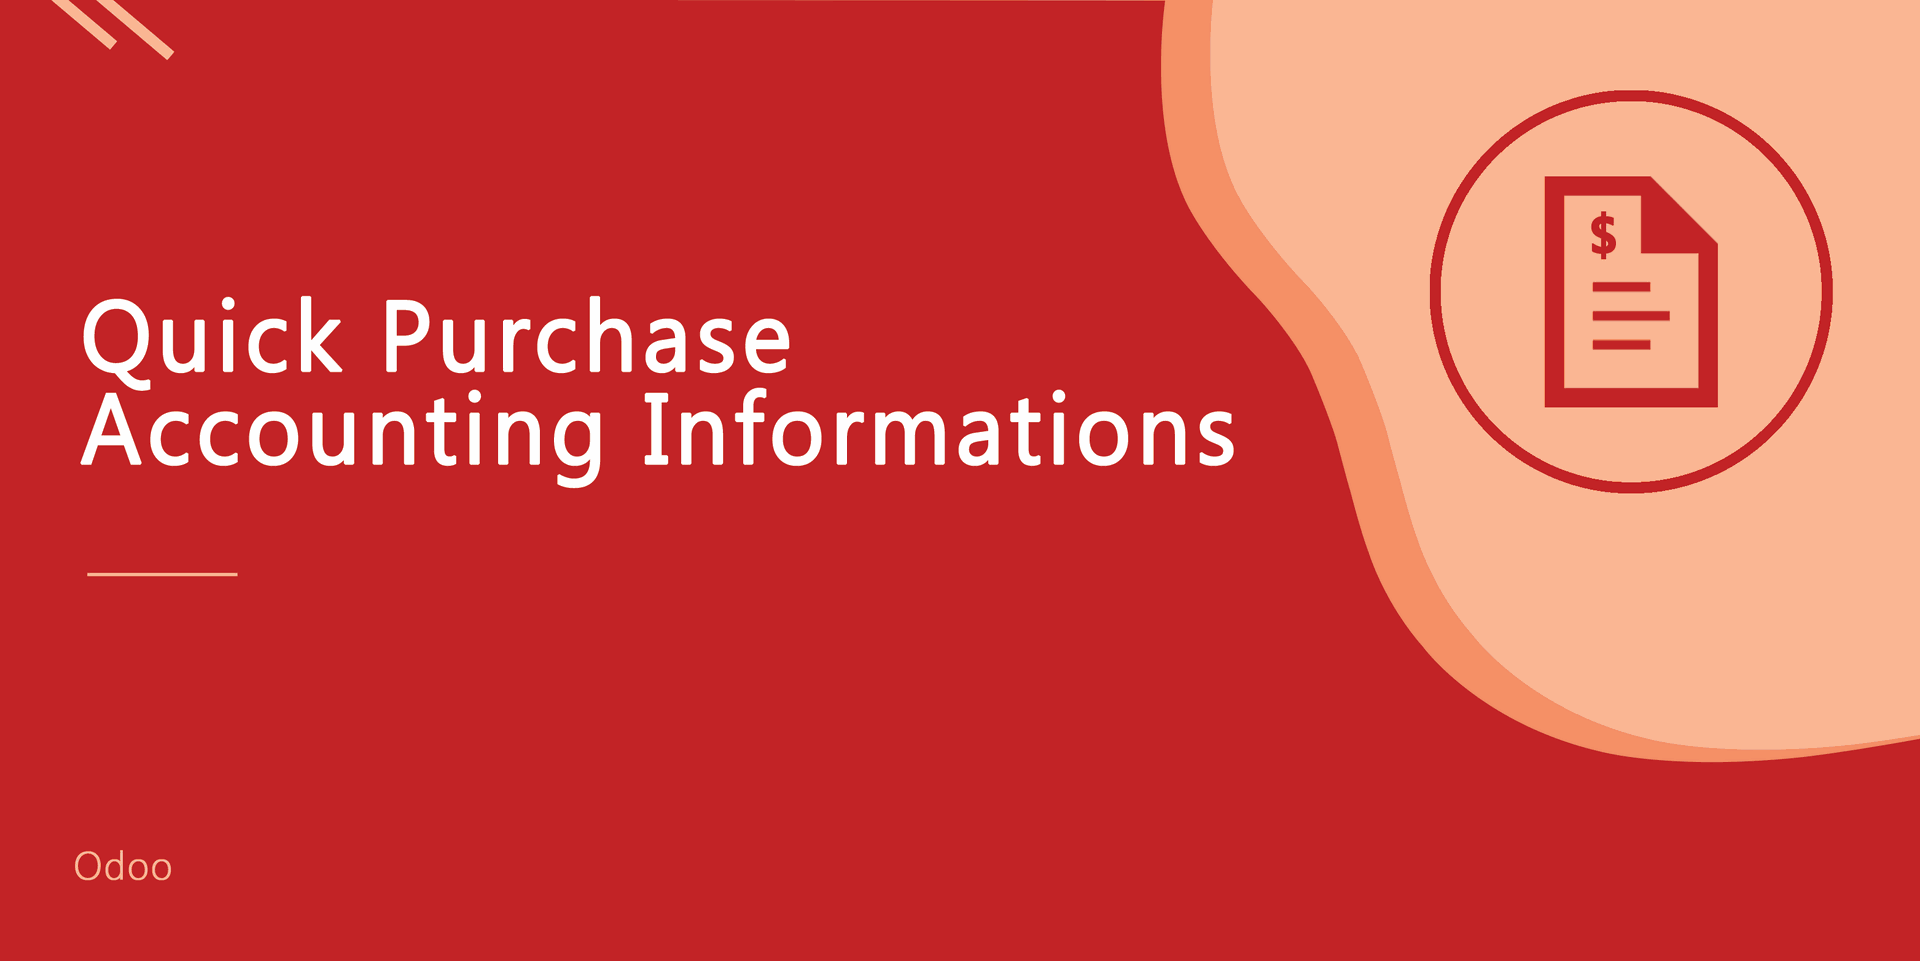 Quick Purchase Accounting Informations